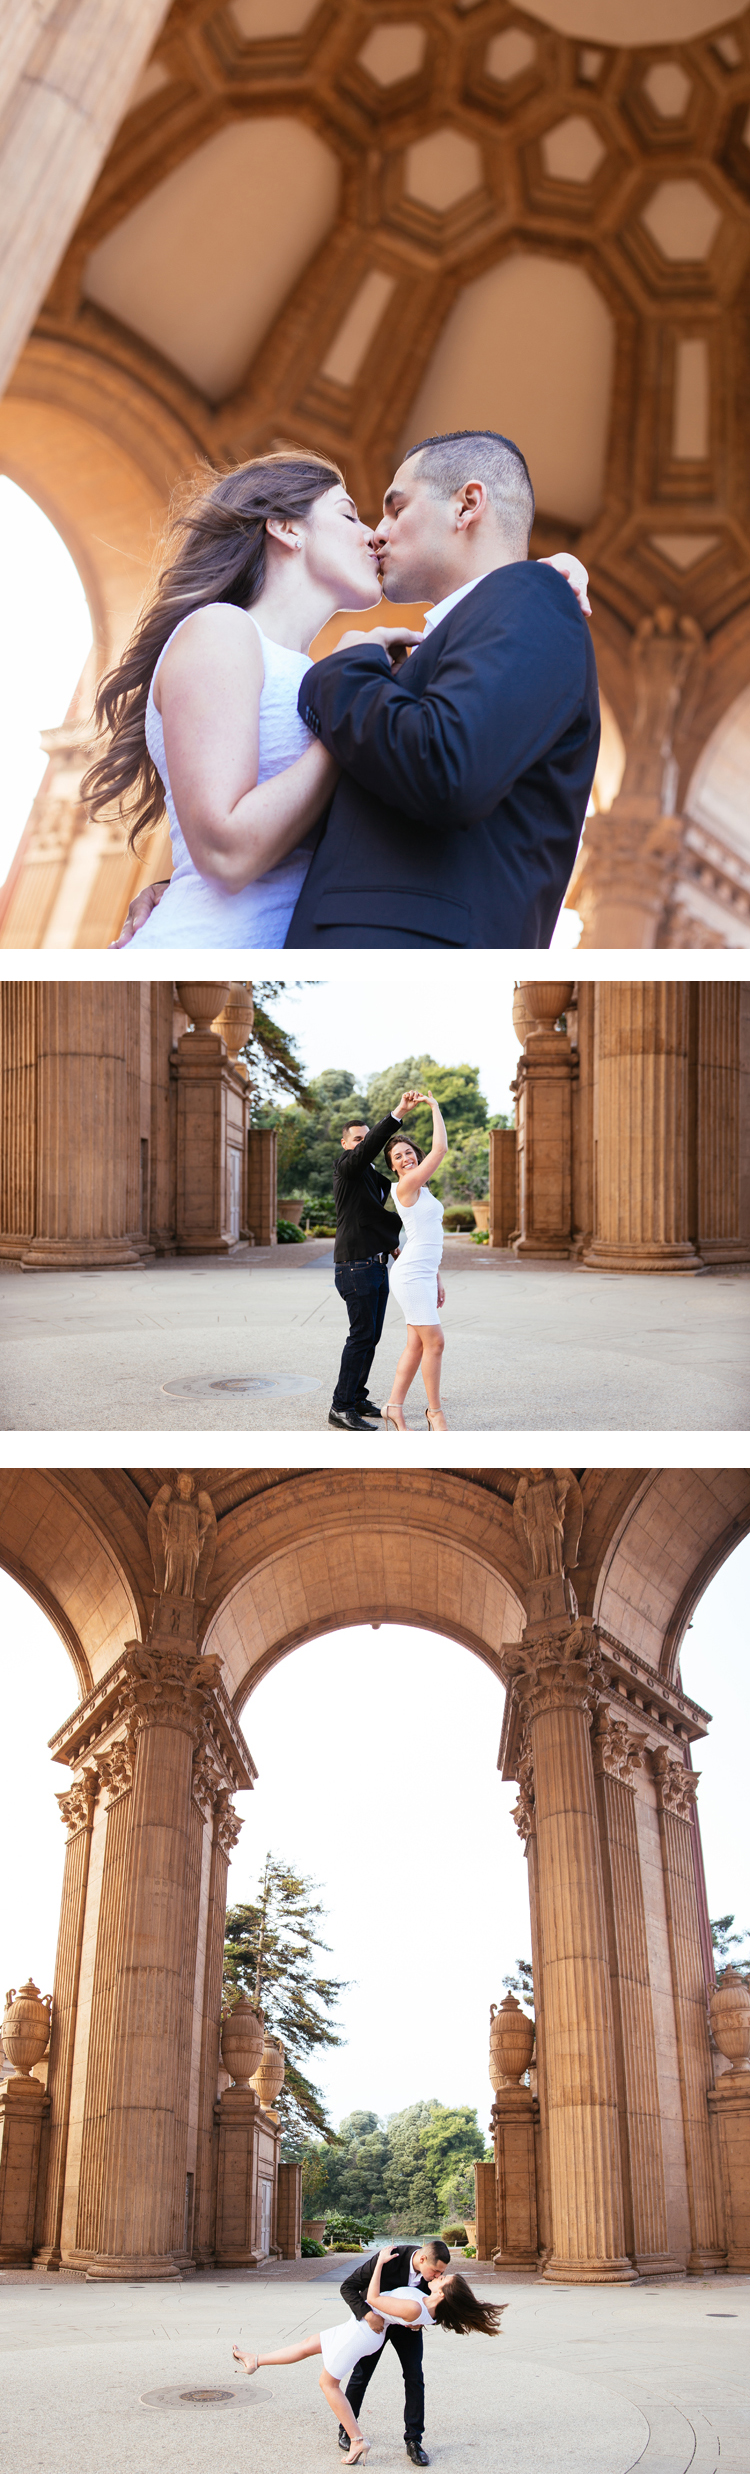 San Francisco Engagement Session Photoshoot | https://mysweetengagement.com/beautiful-and-creative-engagement-photos-and-save-the-date-in-sanfran for more. Photos: Anna Perevertaylo.